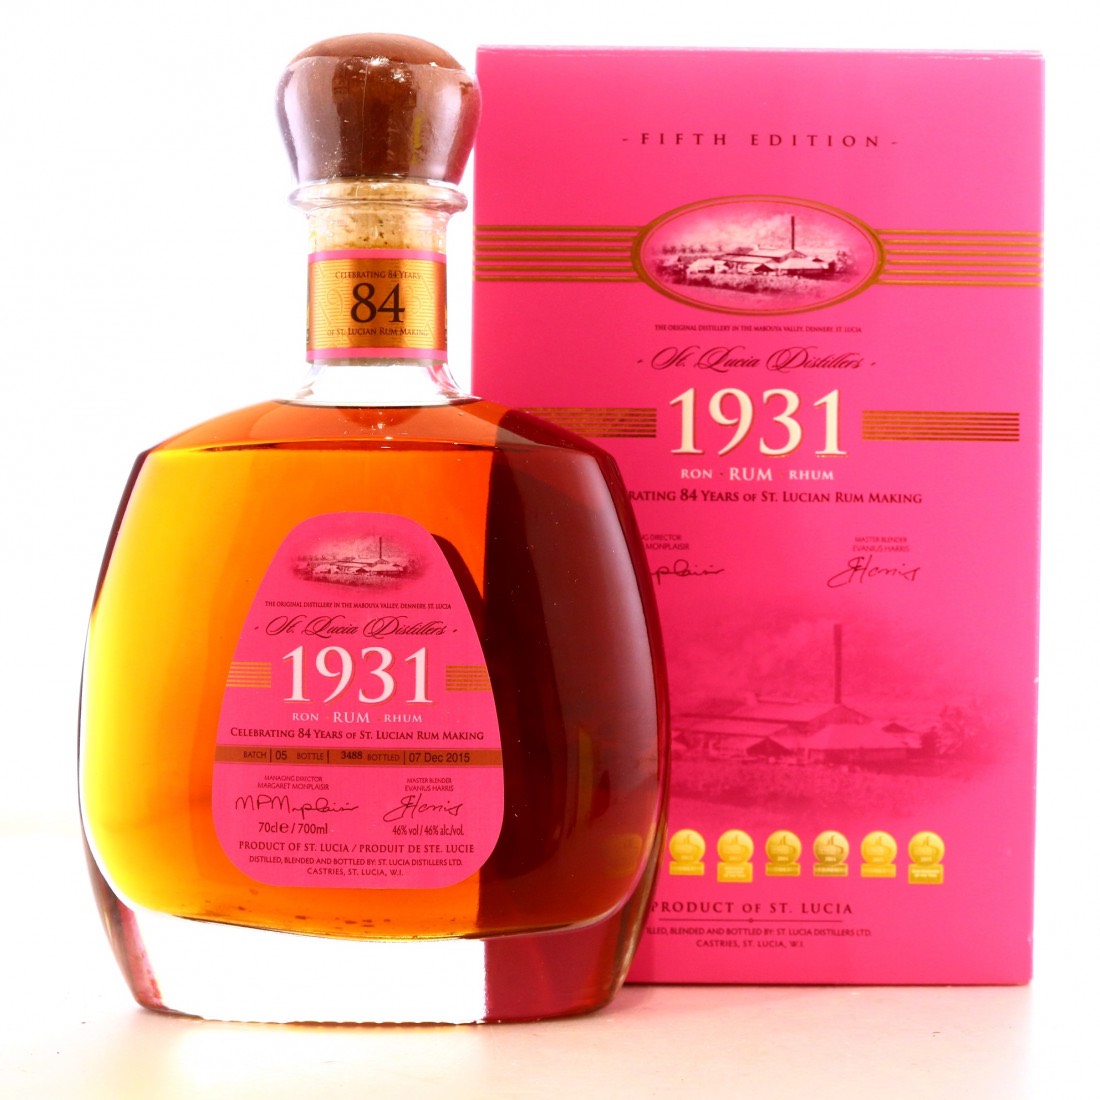 Bottle image of Chairman’s Reserve 1931 - 5th Edition